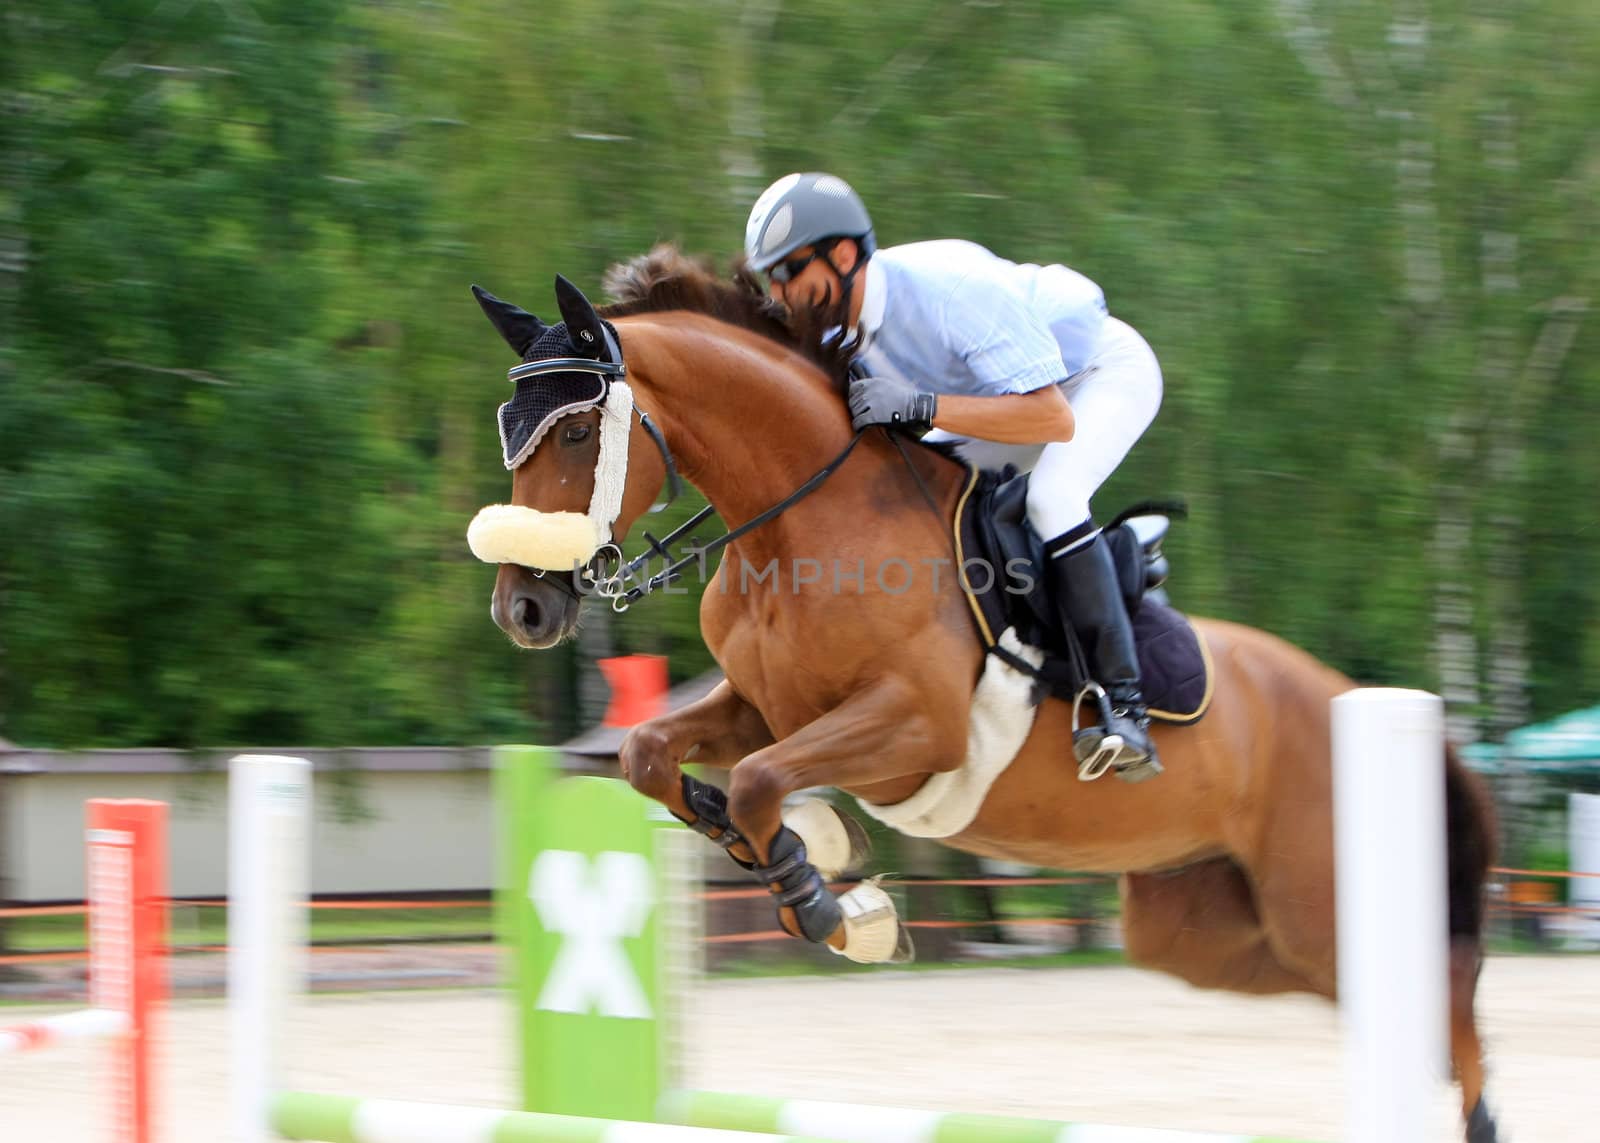 riding competition.jokey with him sport pony